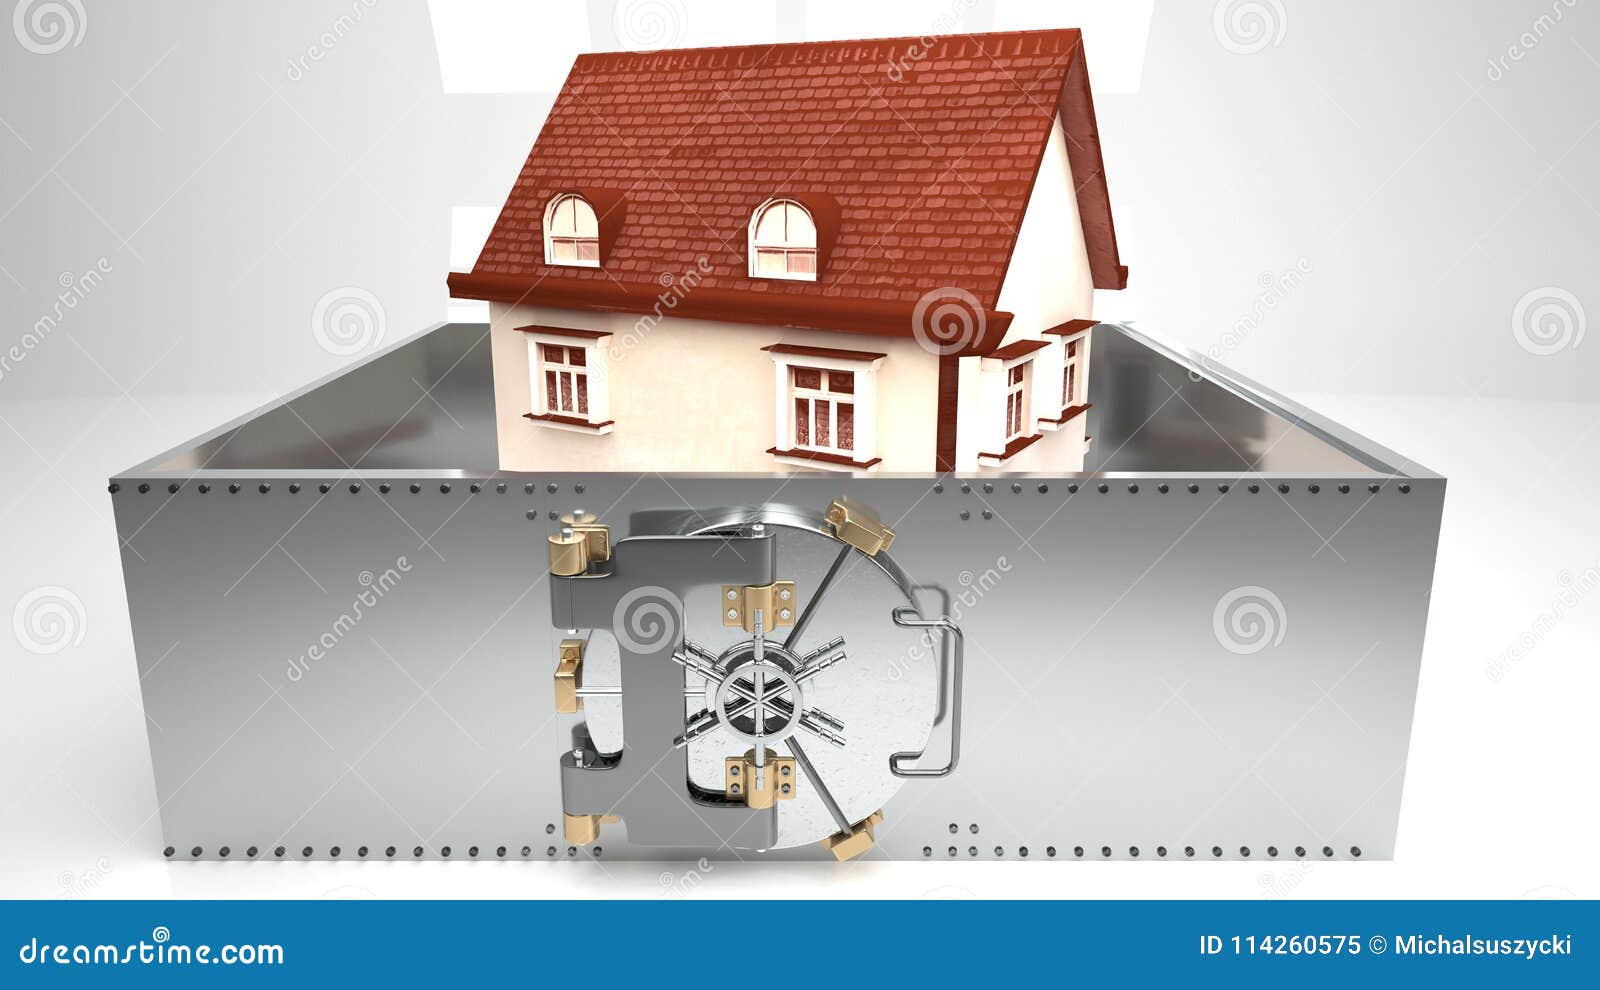 small white house surrounded by a metal wall secured by a round metal bank vault doors, white background